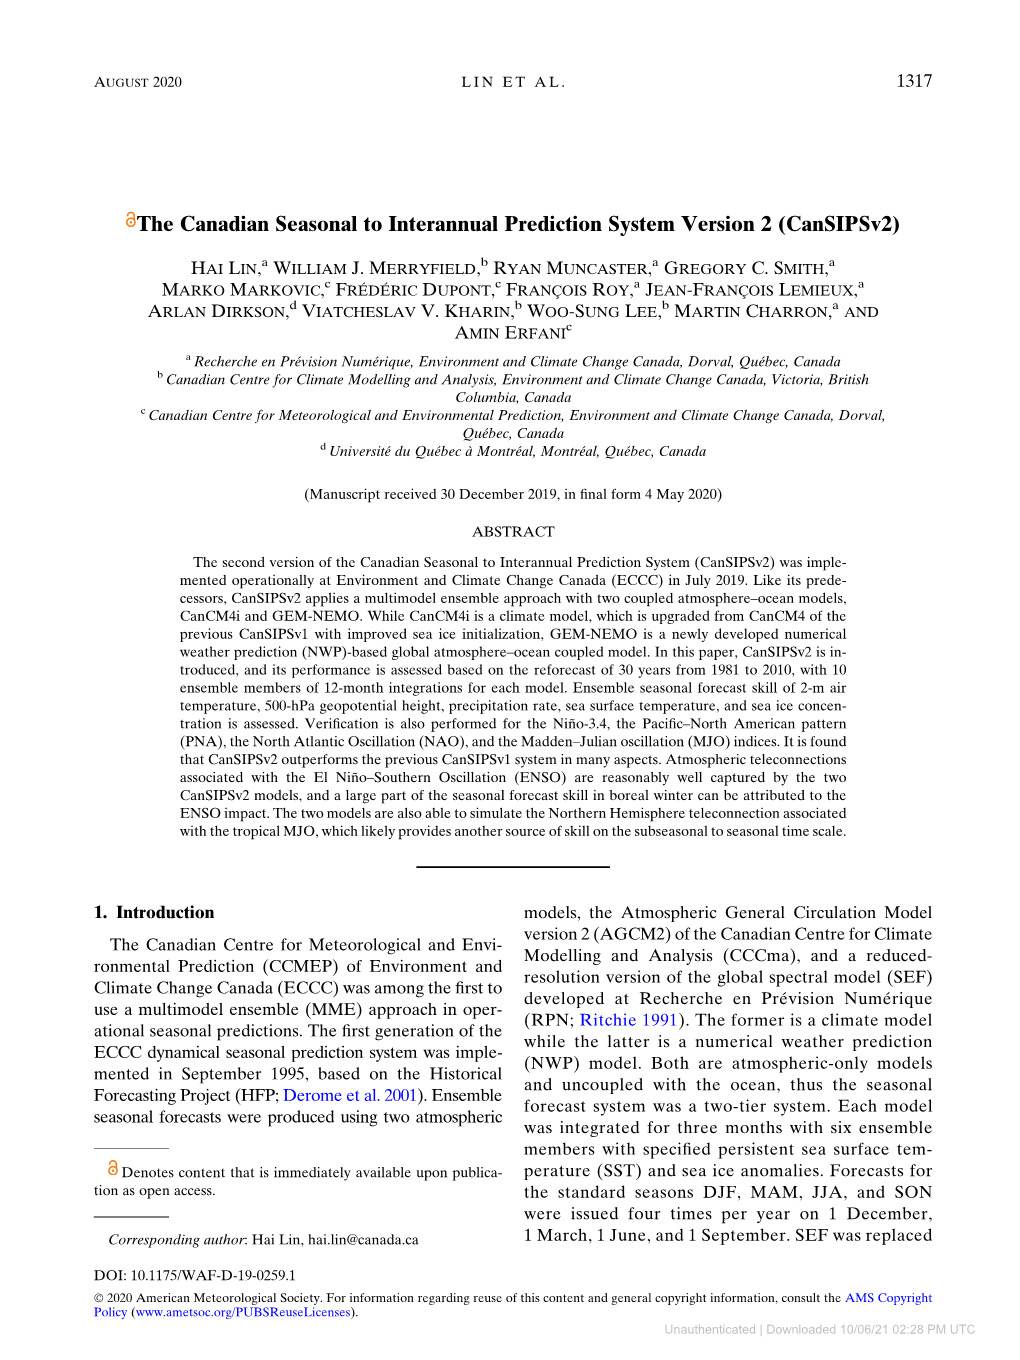 The Canadian Seasonal to Interannual Prediction System Version 2 (Cansipsv2)